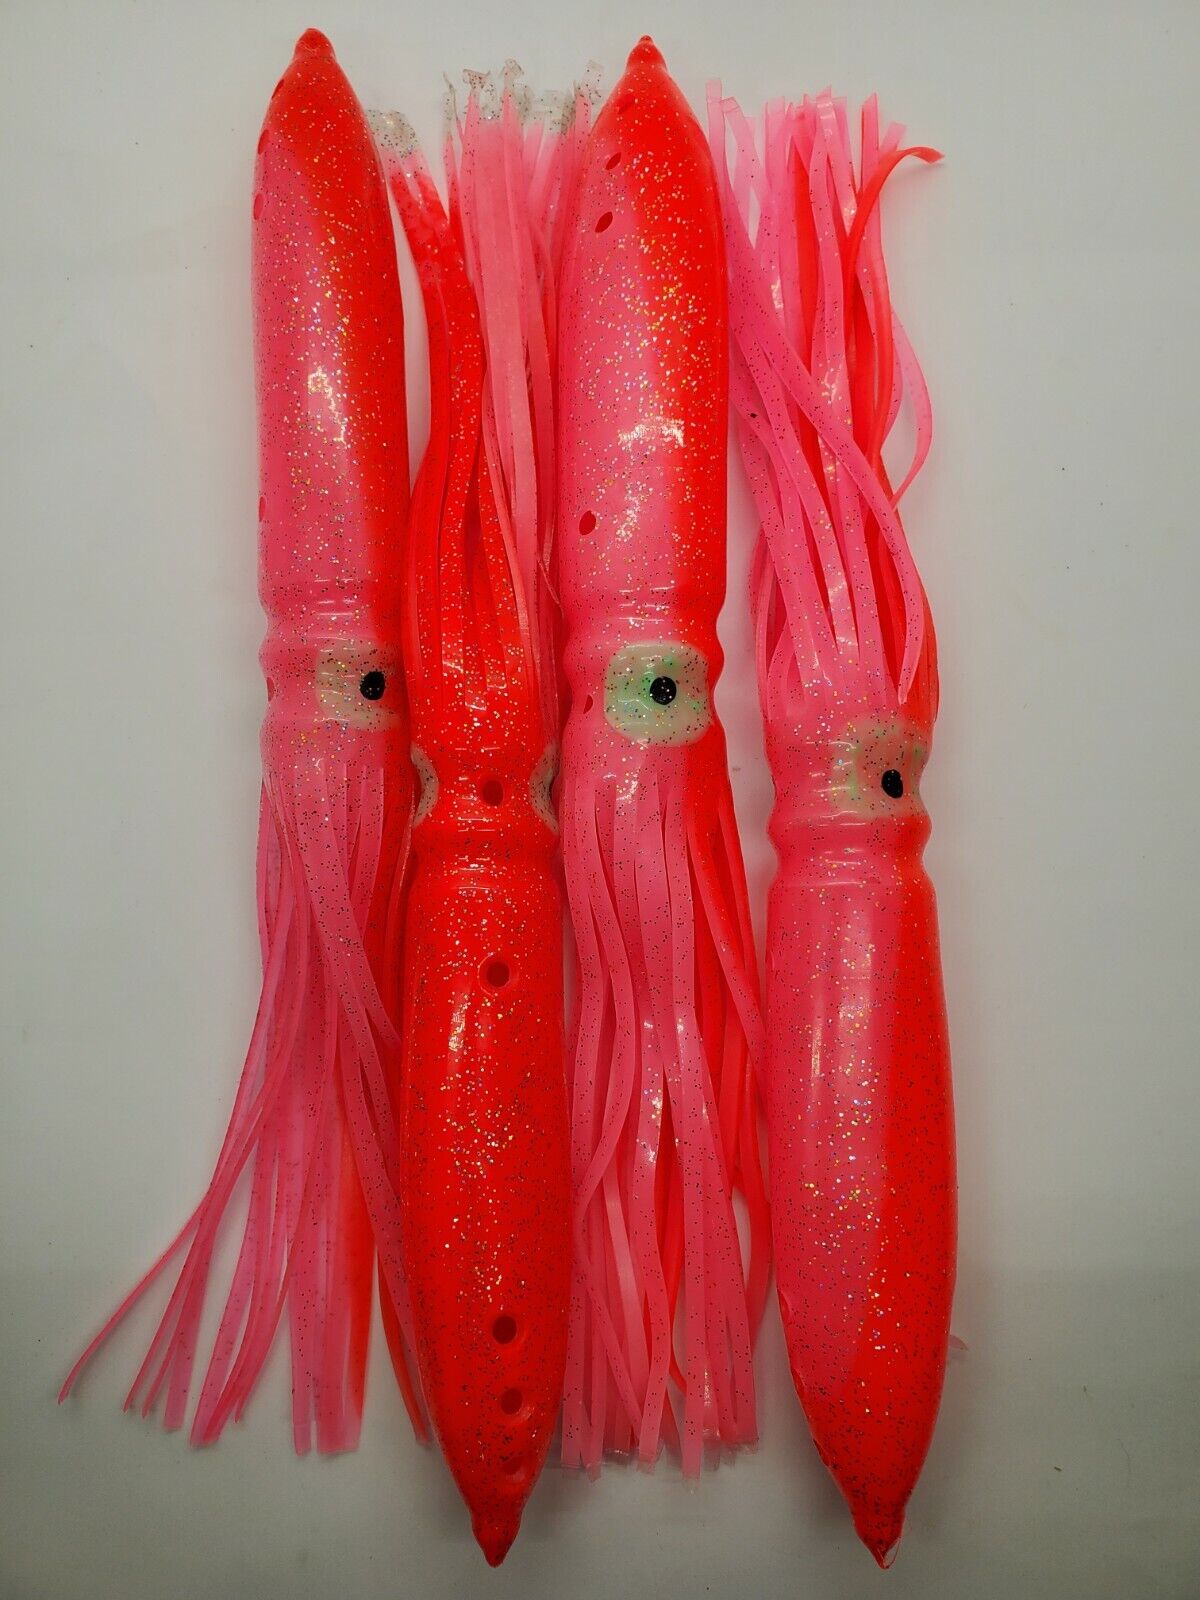 001# Supply USA Hawaii Offshore Fishing Lure Flasher Trolling Lure Skirts